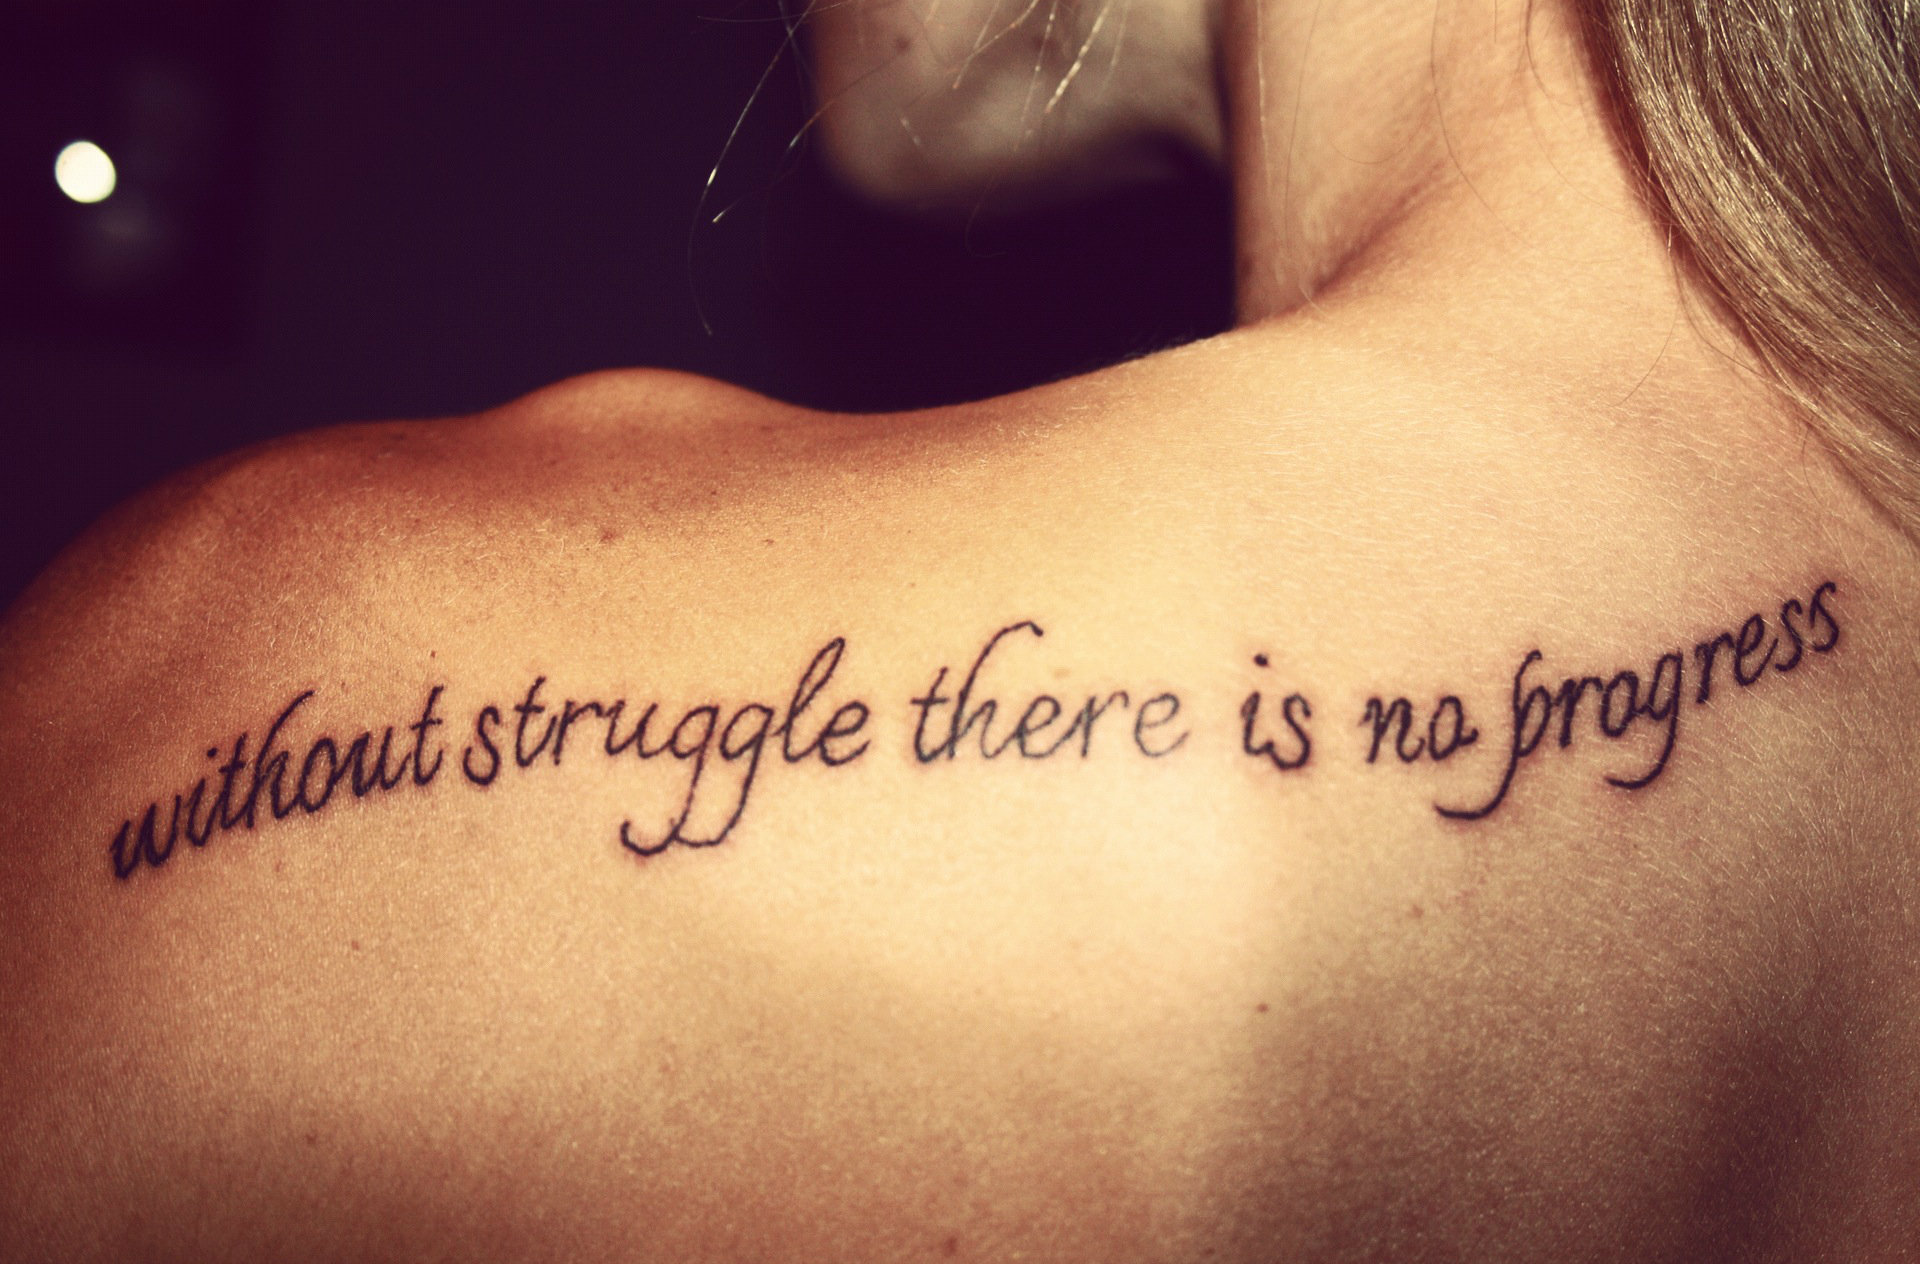 Without struggle, there is no progress!